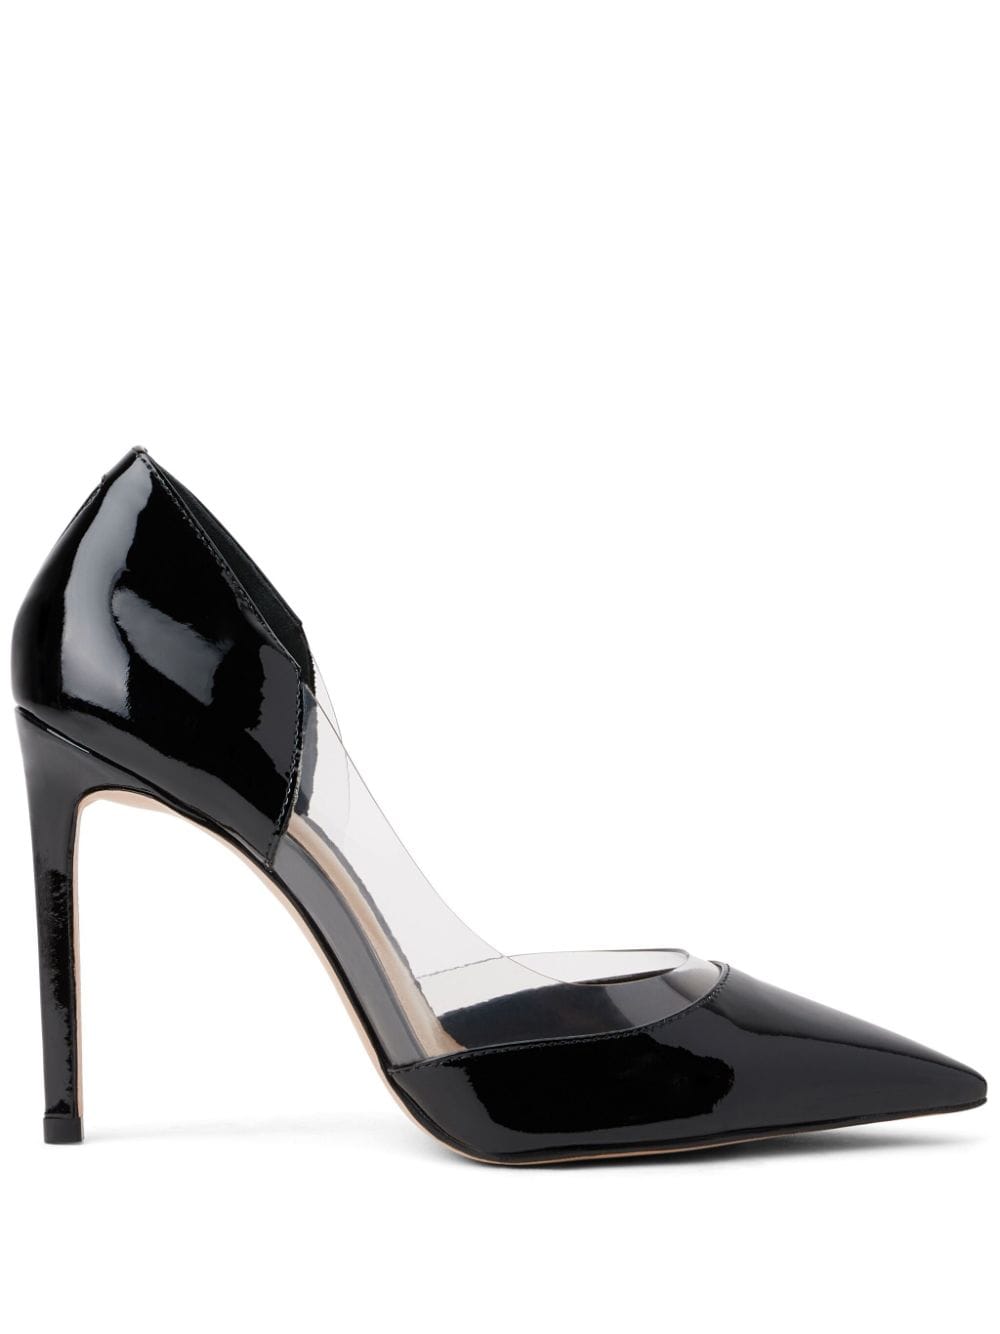 Schutz 105mm Pointed-toe Leather Pumps In Black